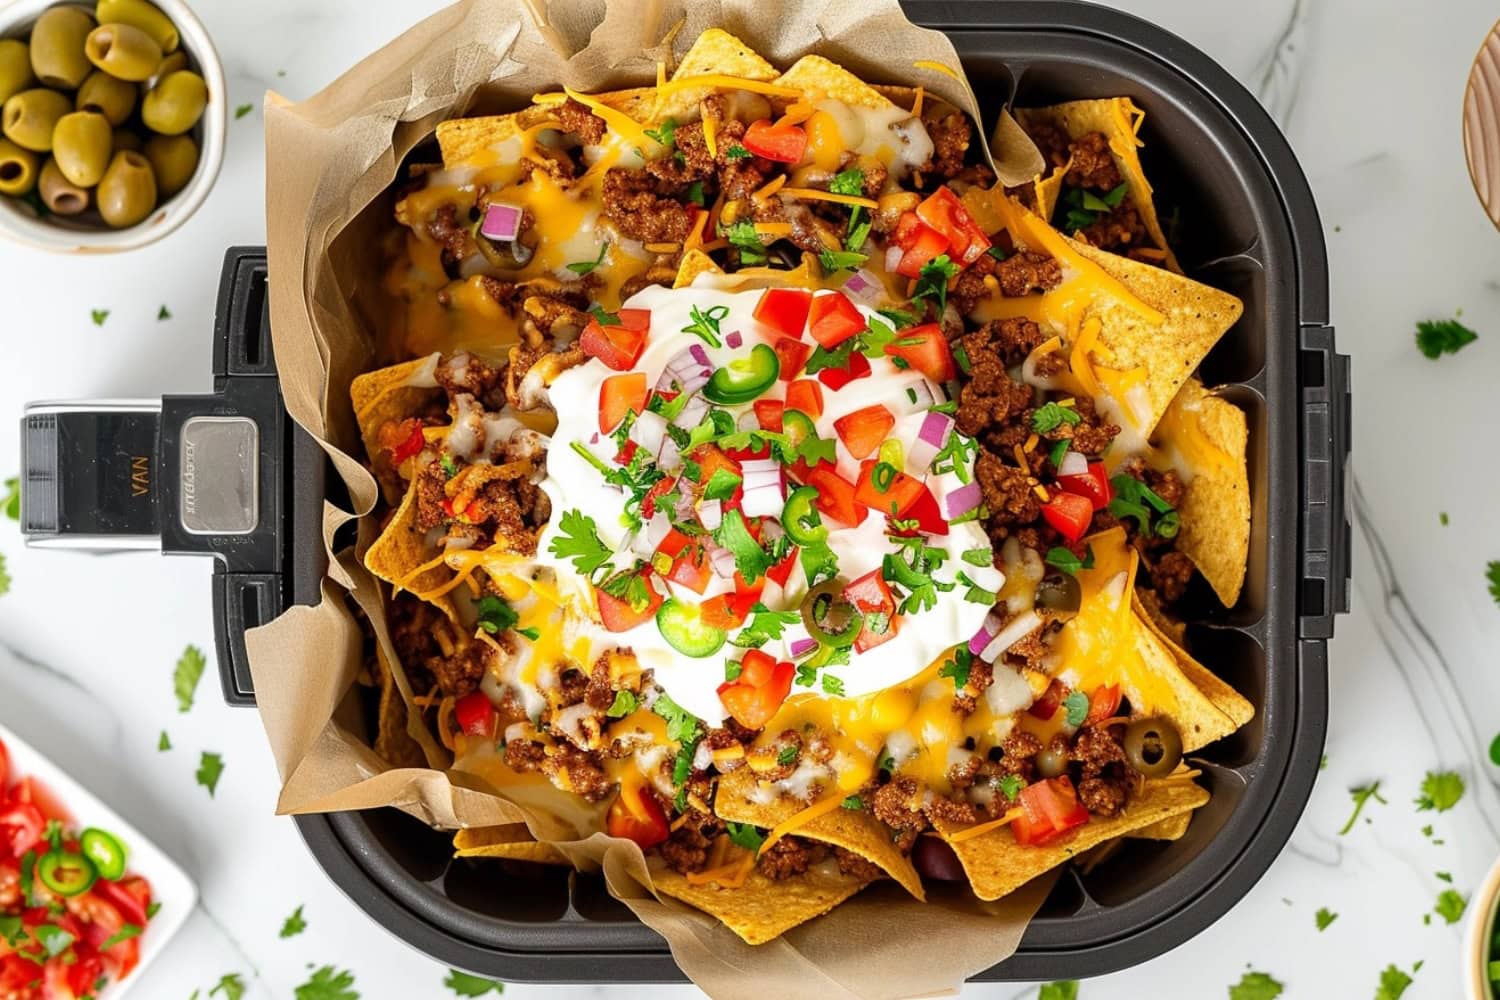 Nachos prepared inside an air fryer basket loaded with tacos, veggies, cheese and sour cream.